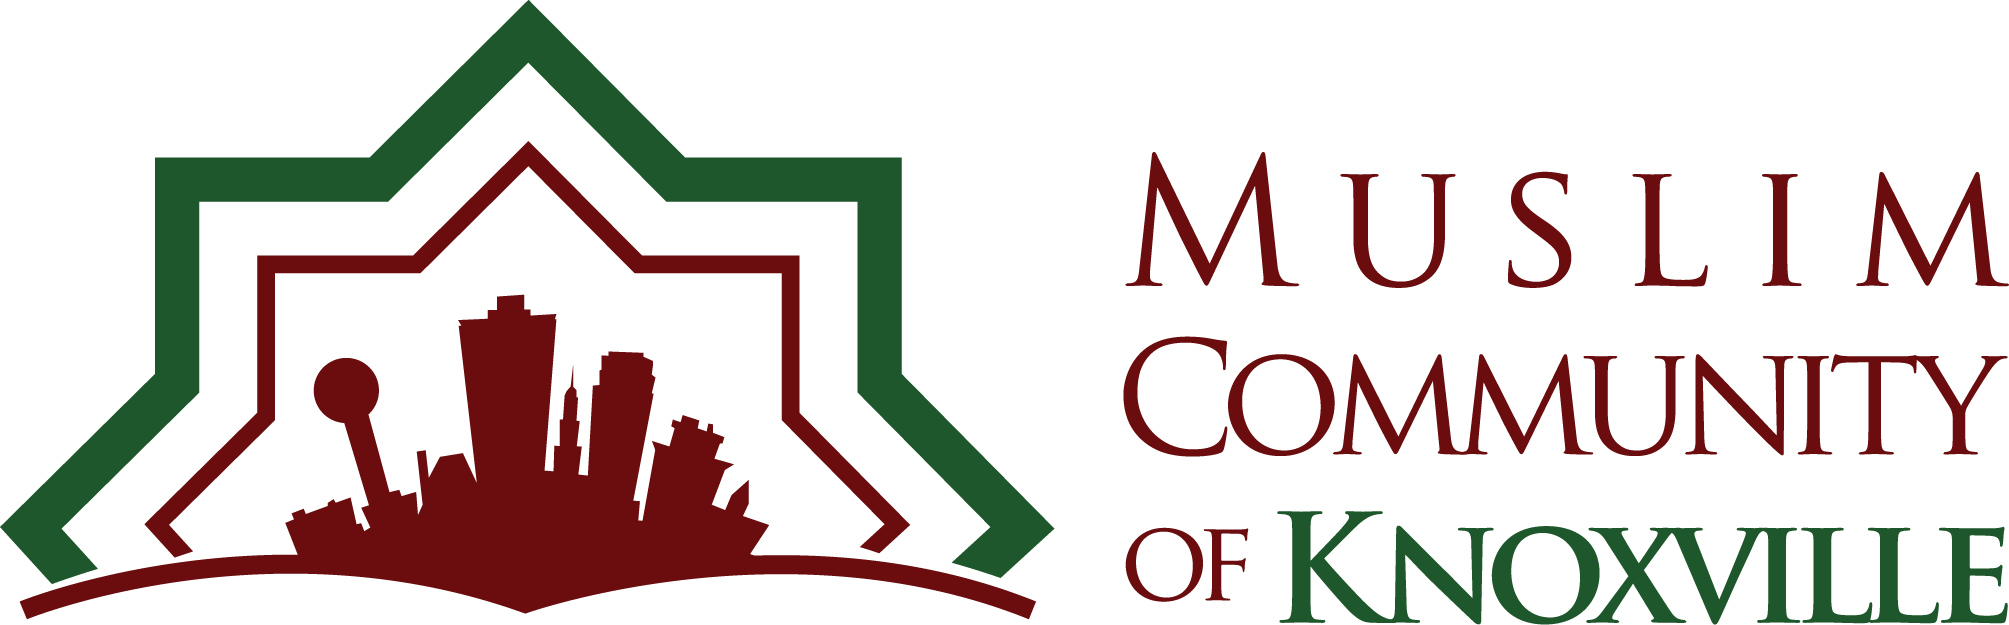 Muslim Community of Knoxville logo